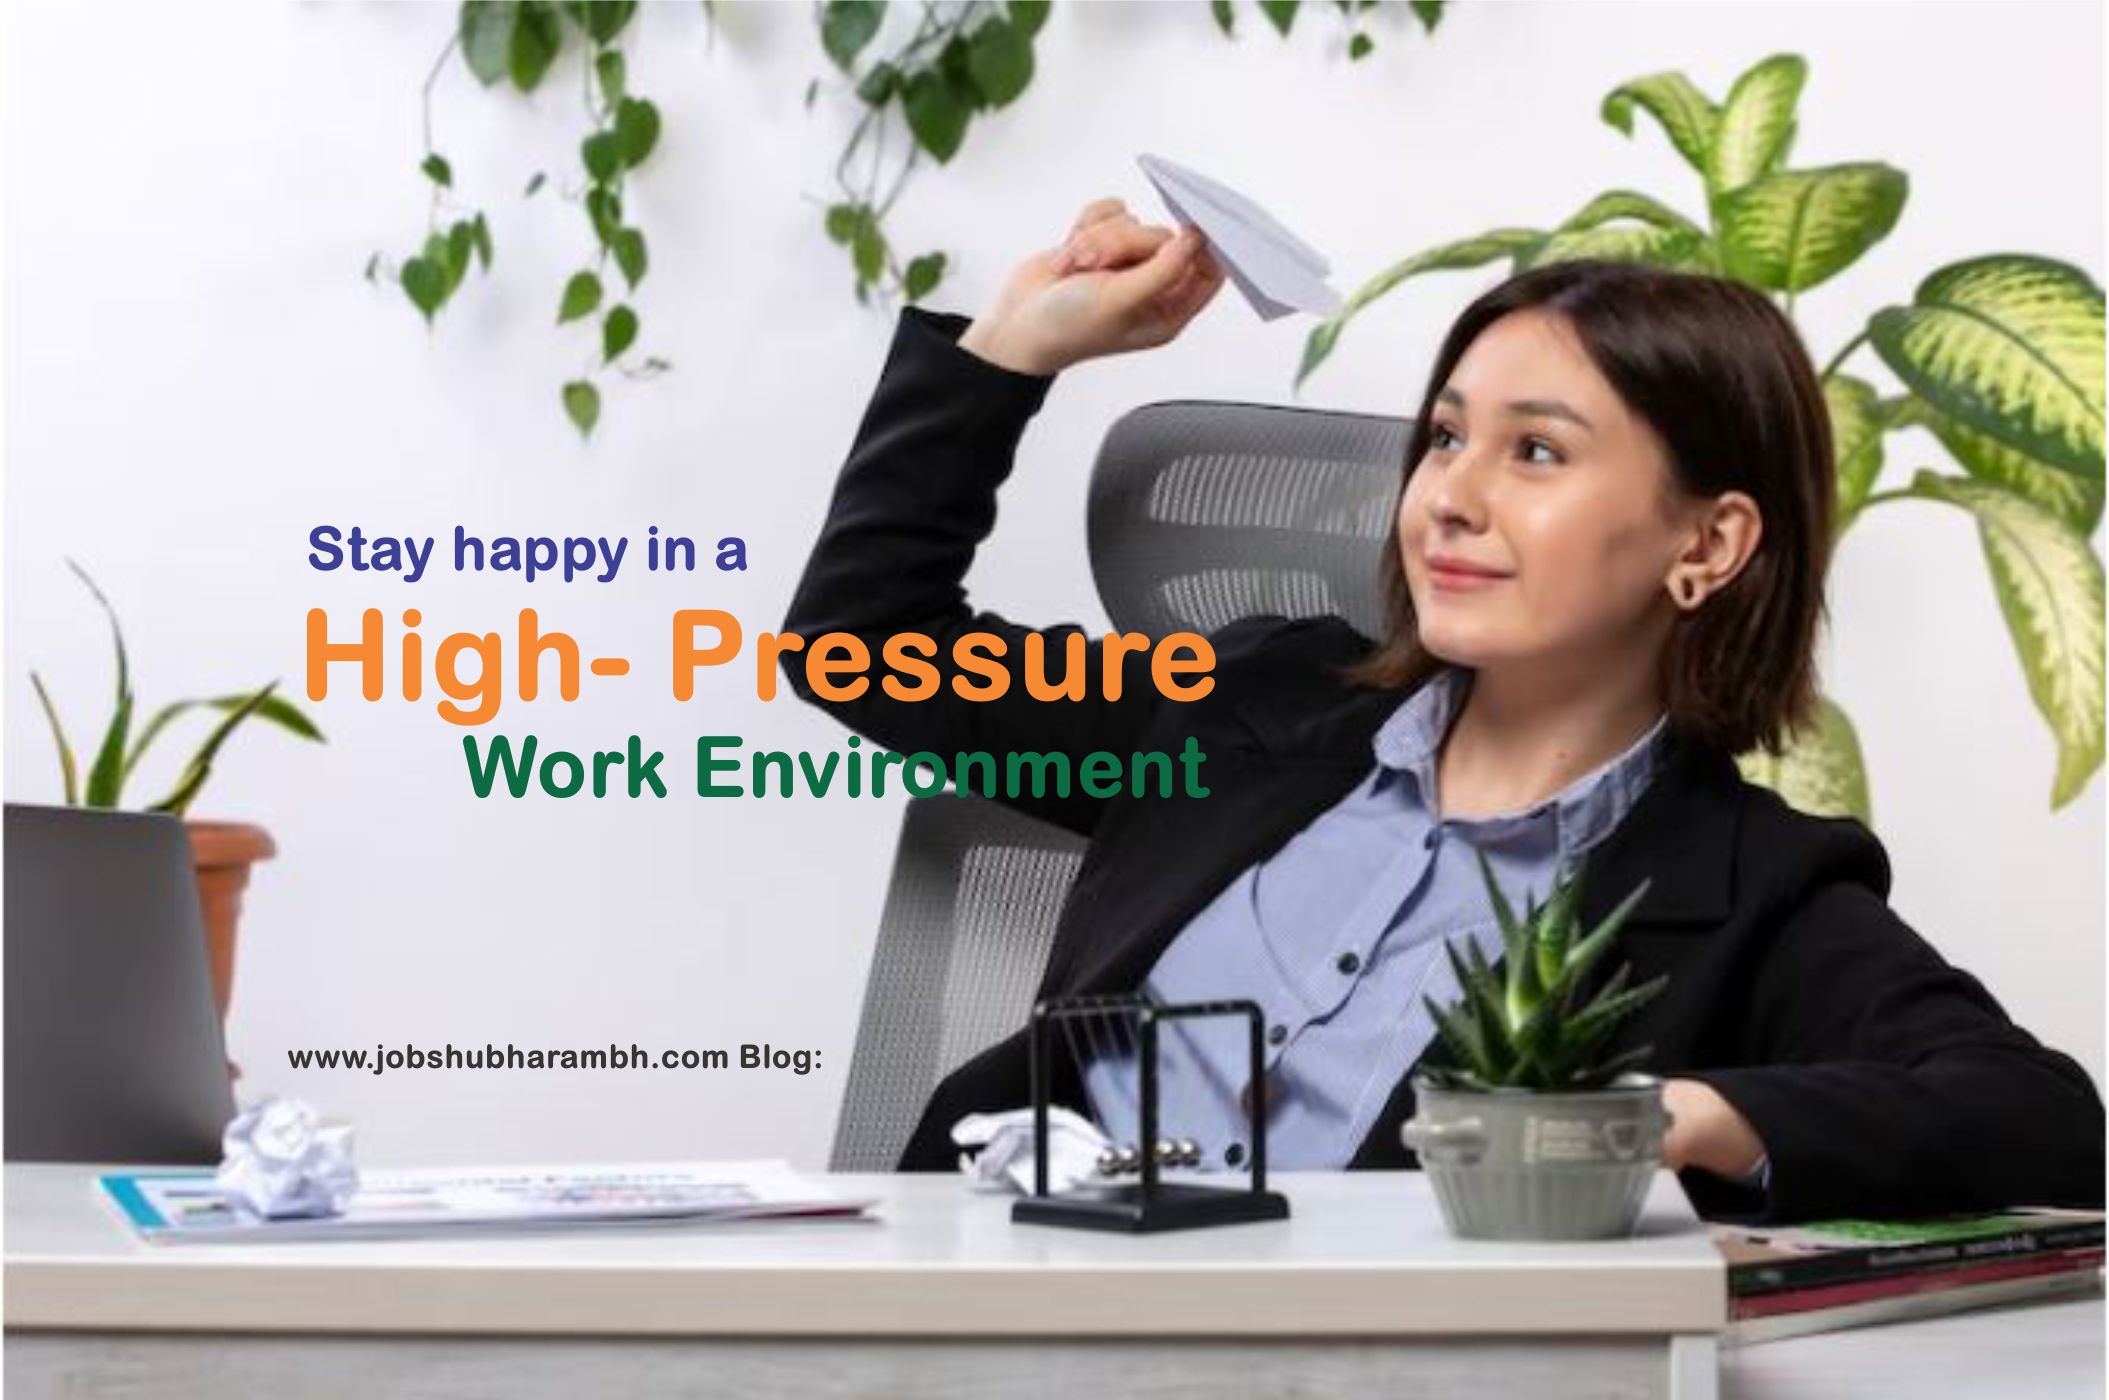 Stay Happy in a High-Pressure Work Environment